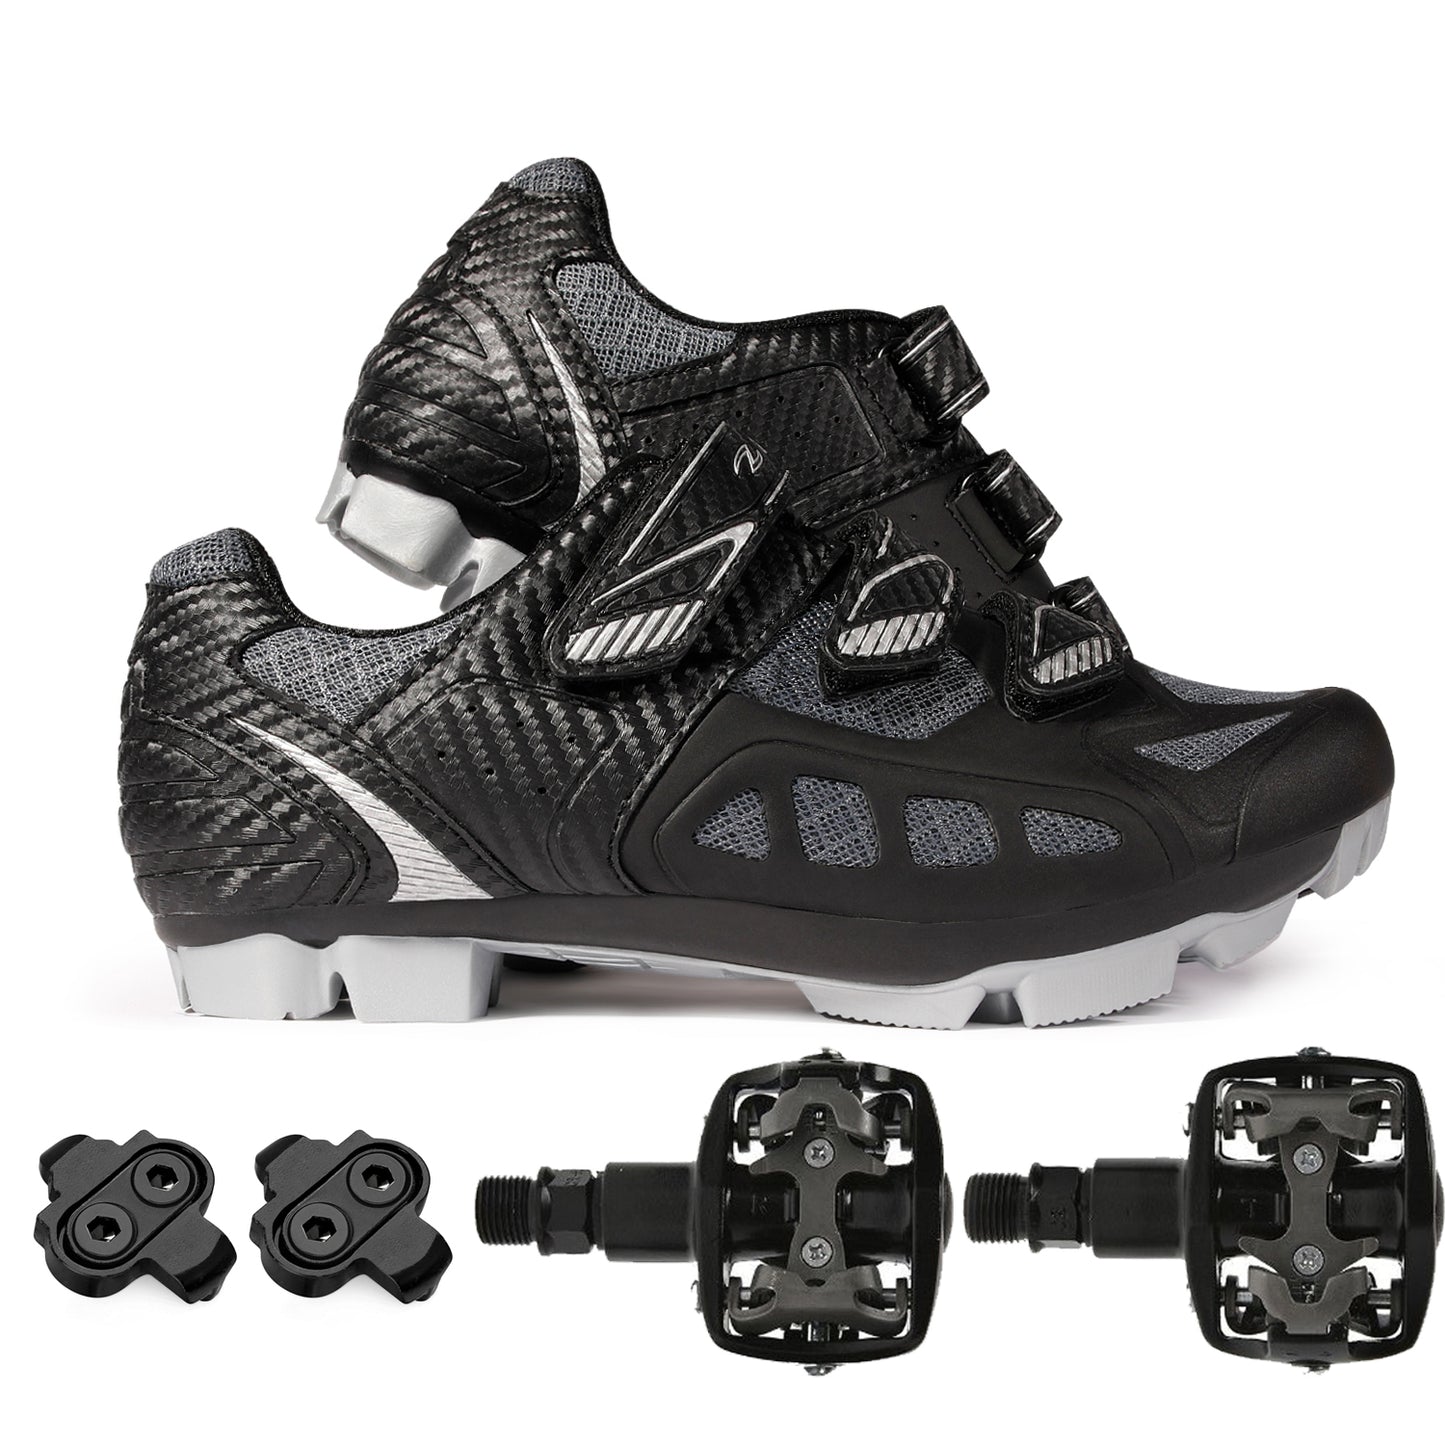 Zol Predator Mtb Mountain Bike and Indoor Cycling Shoes Pedals and Cleats - Zol Cycling